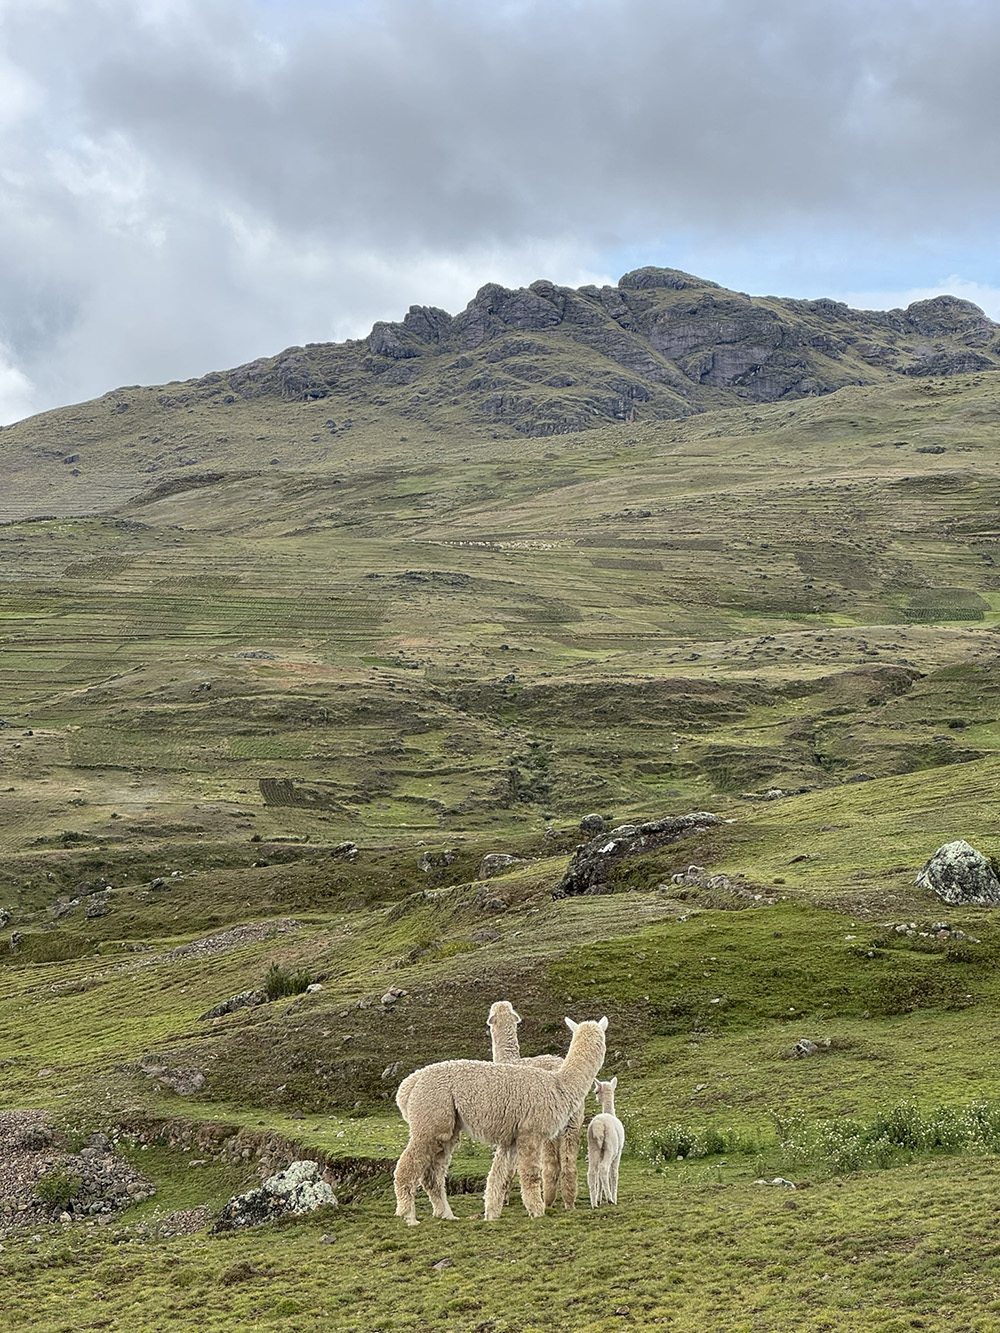 Nurturing Potato. Alpaca Faeces and Metabolic Ecologies in an Agrobiodiversity Conservation Area of the Peruvian Andes